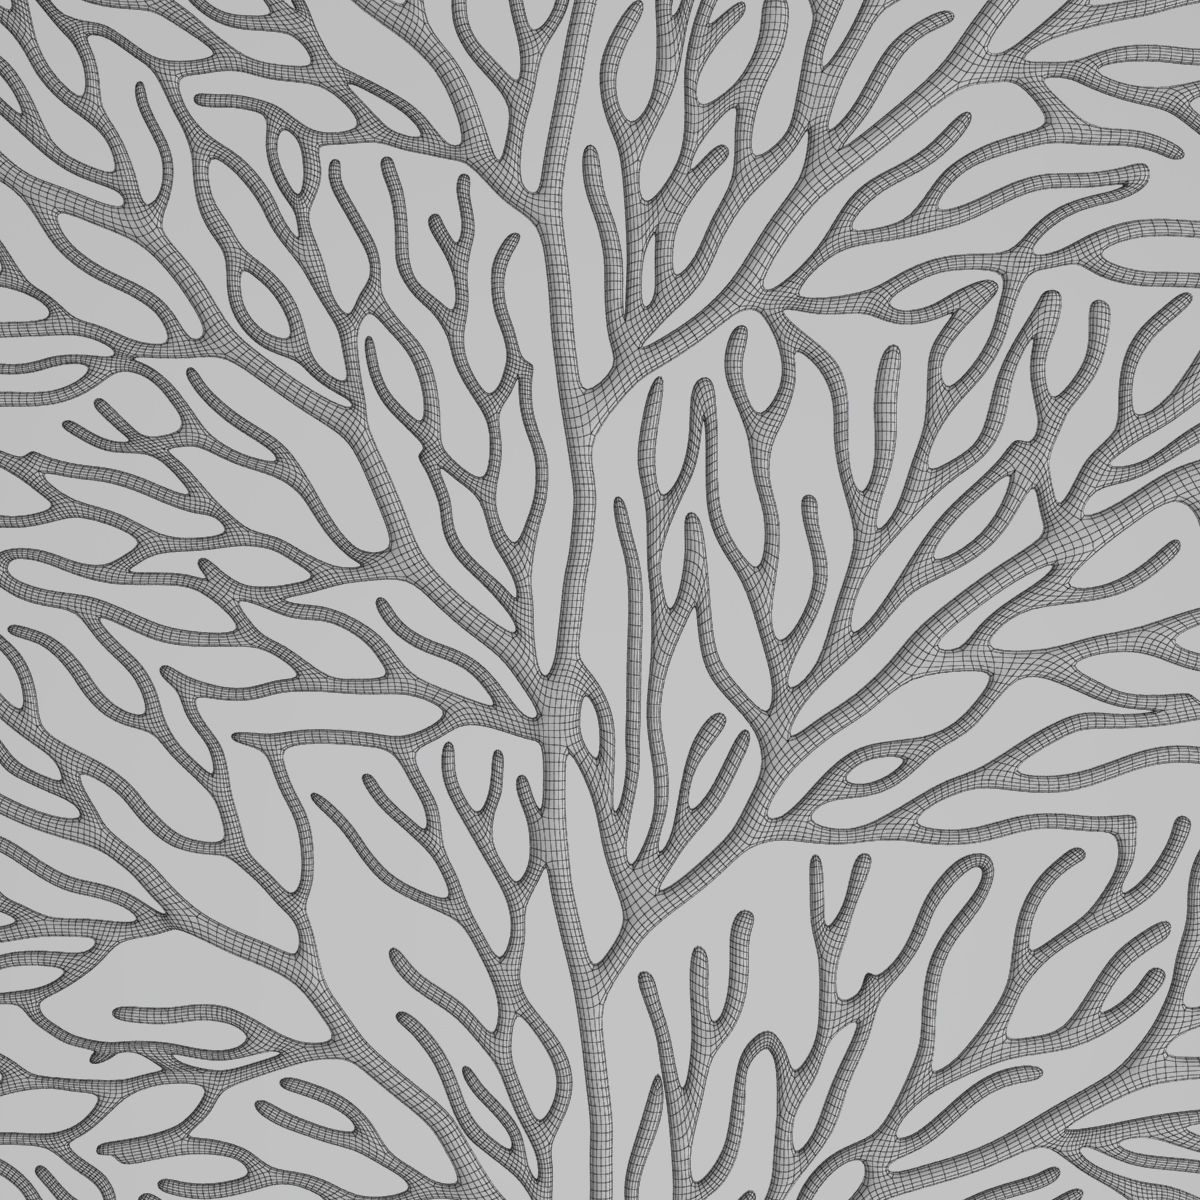 Coral Wall Art 3d | Cgtrader Inside Best And Newest Coral Wall Art (View 6 of 20)